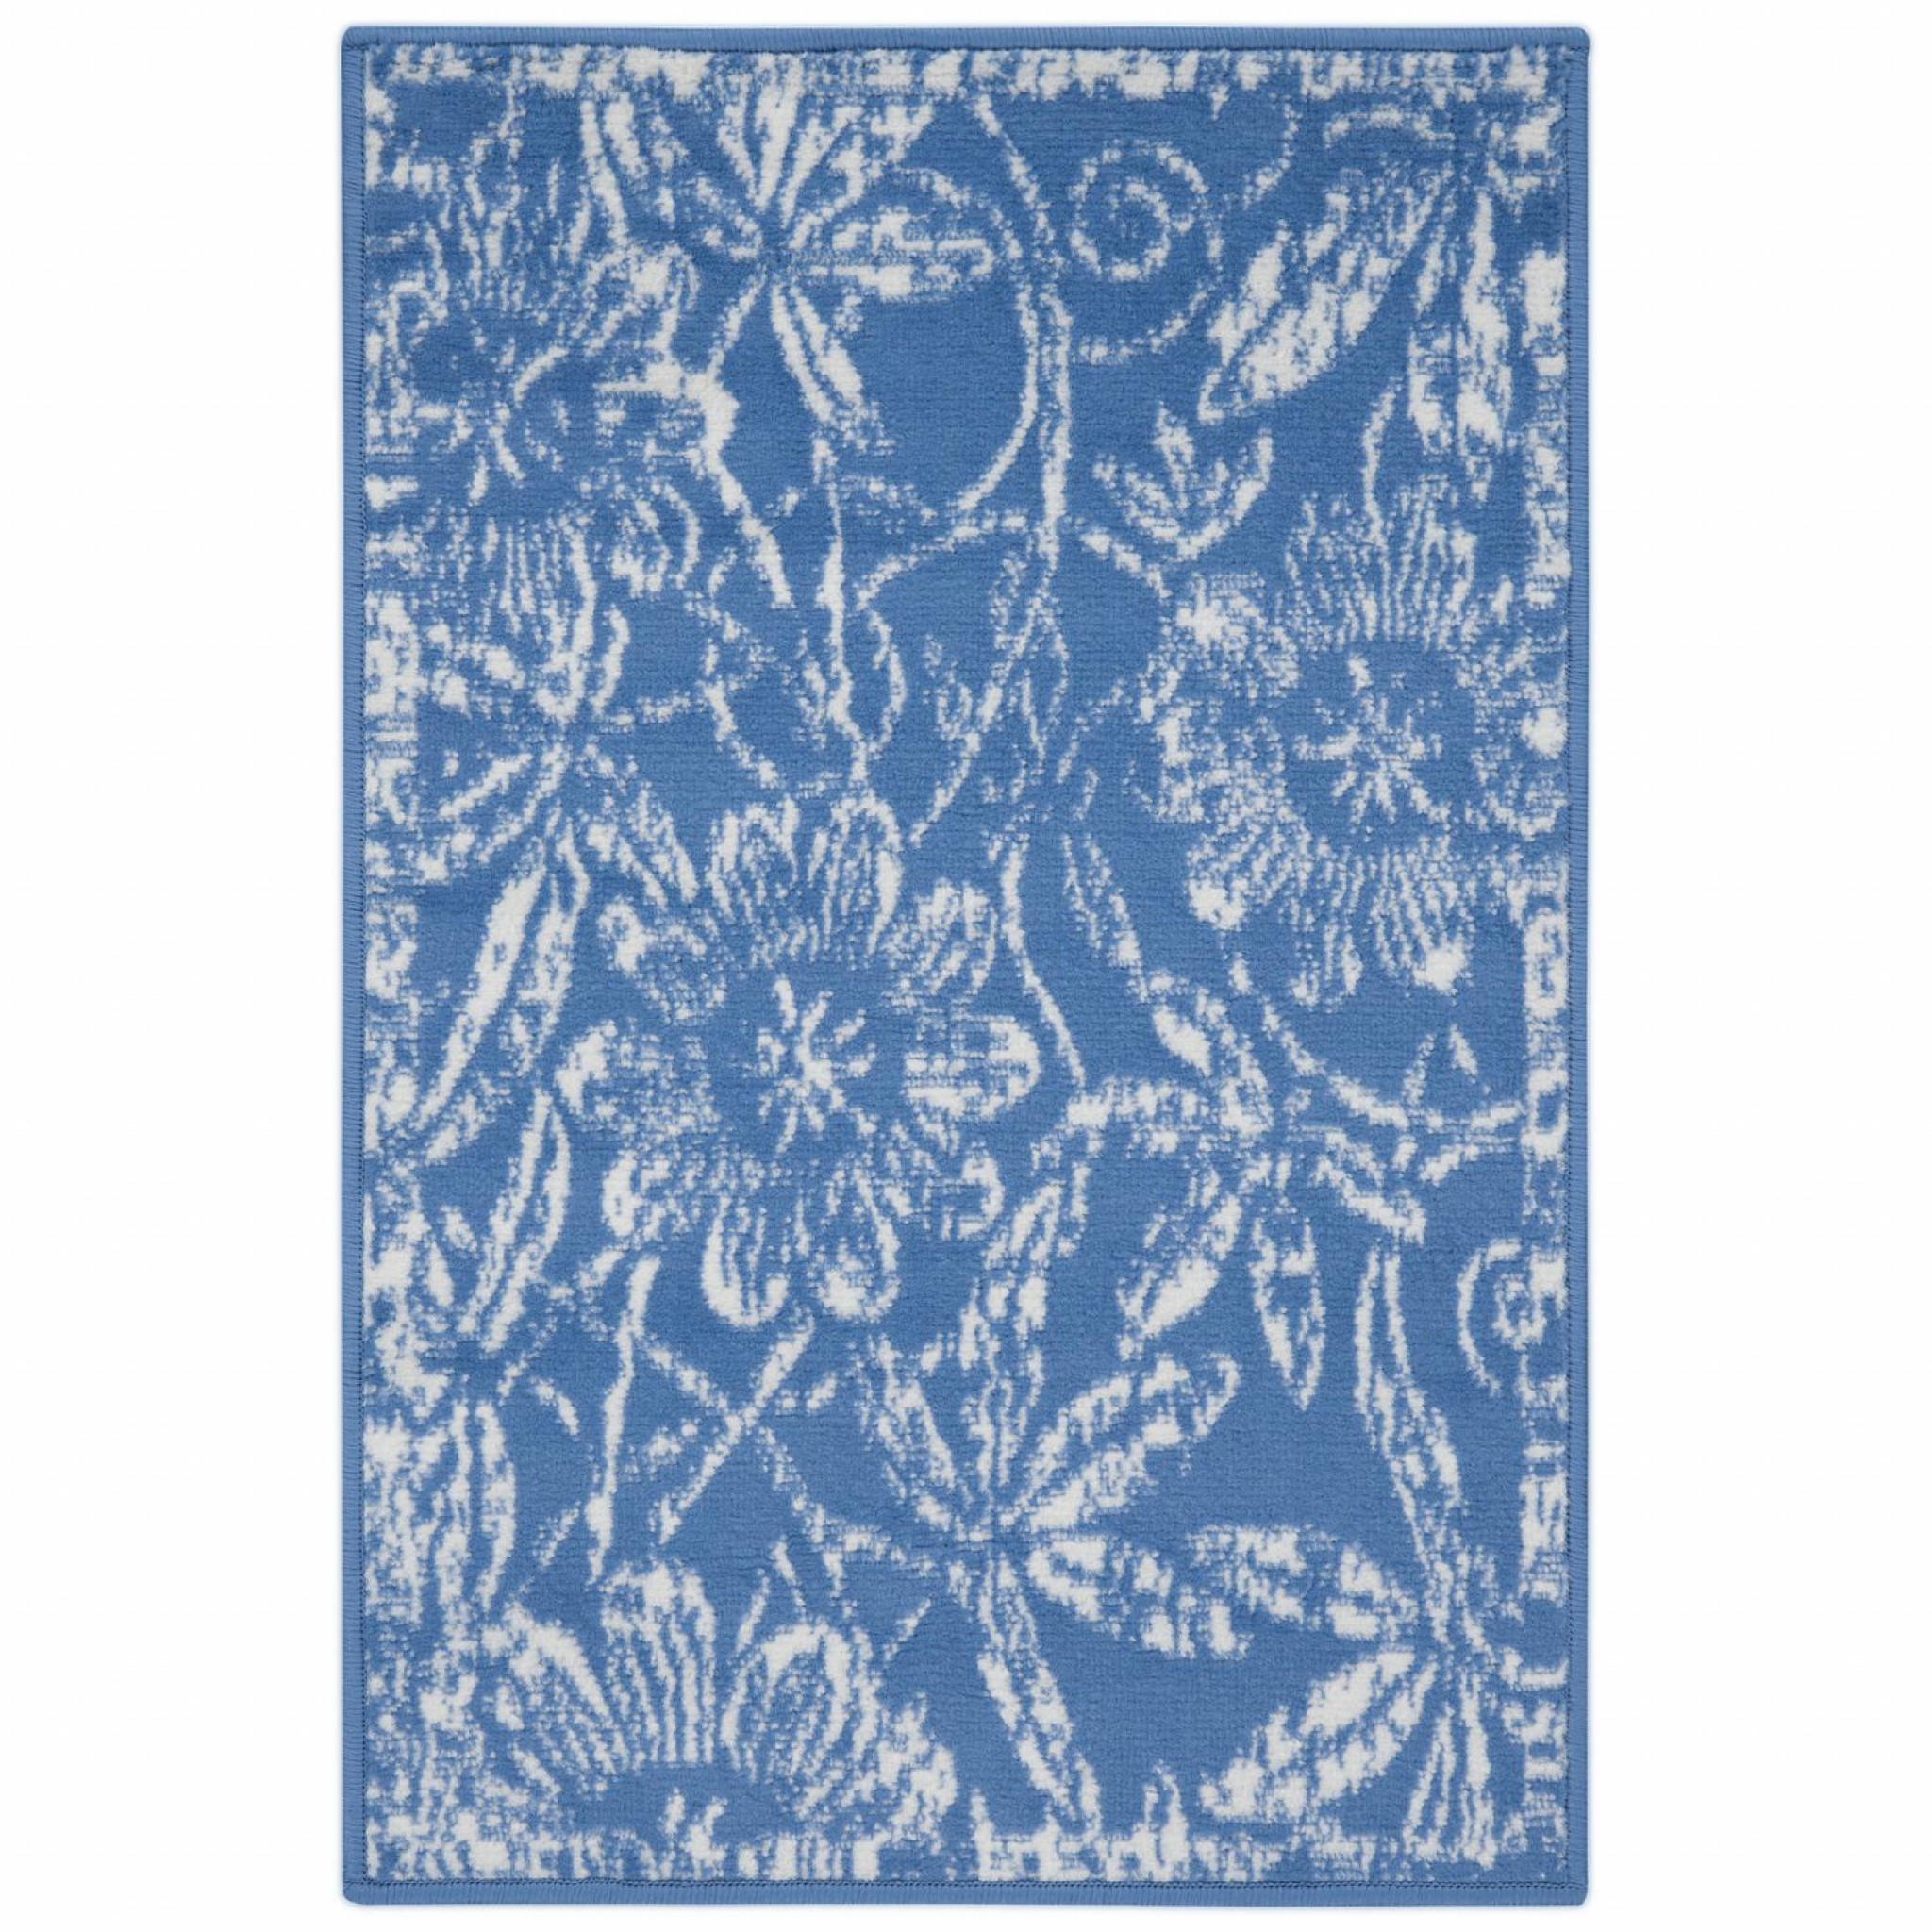 4' X 6' Blue Floral Dhurrie Area Rug-385844-1